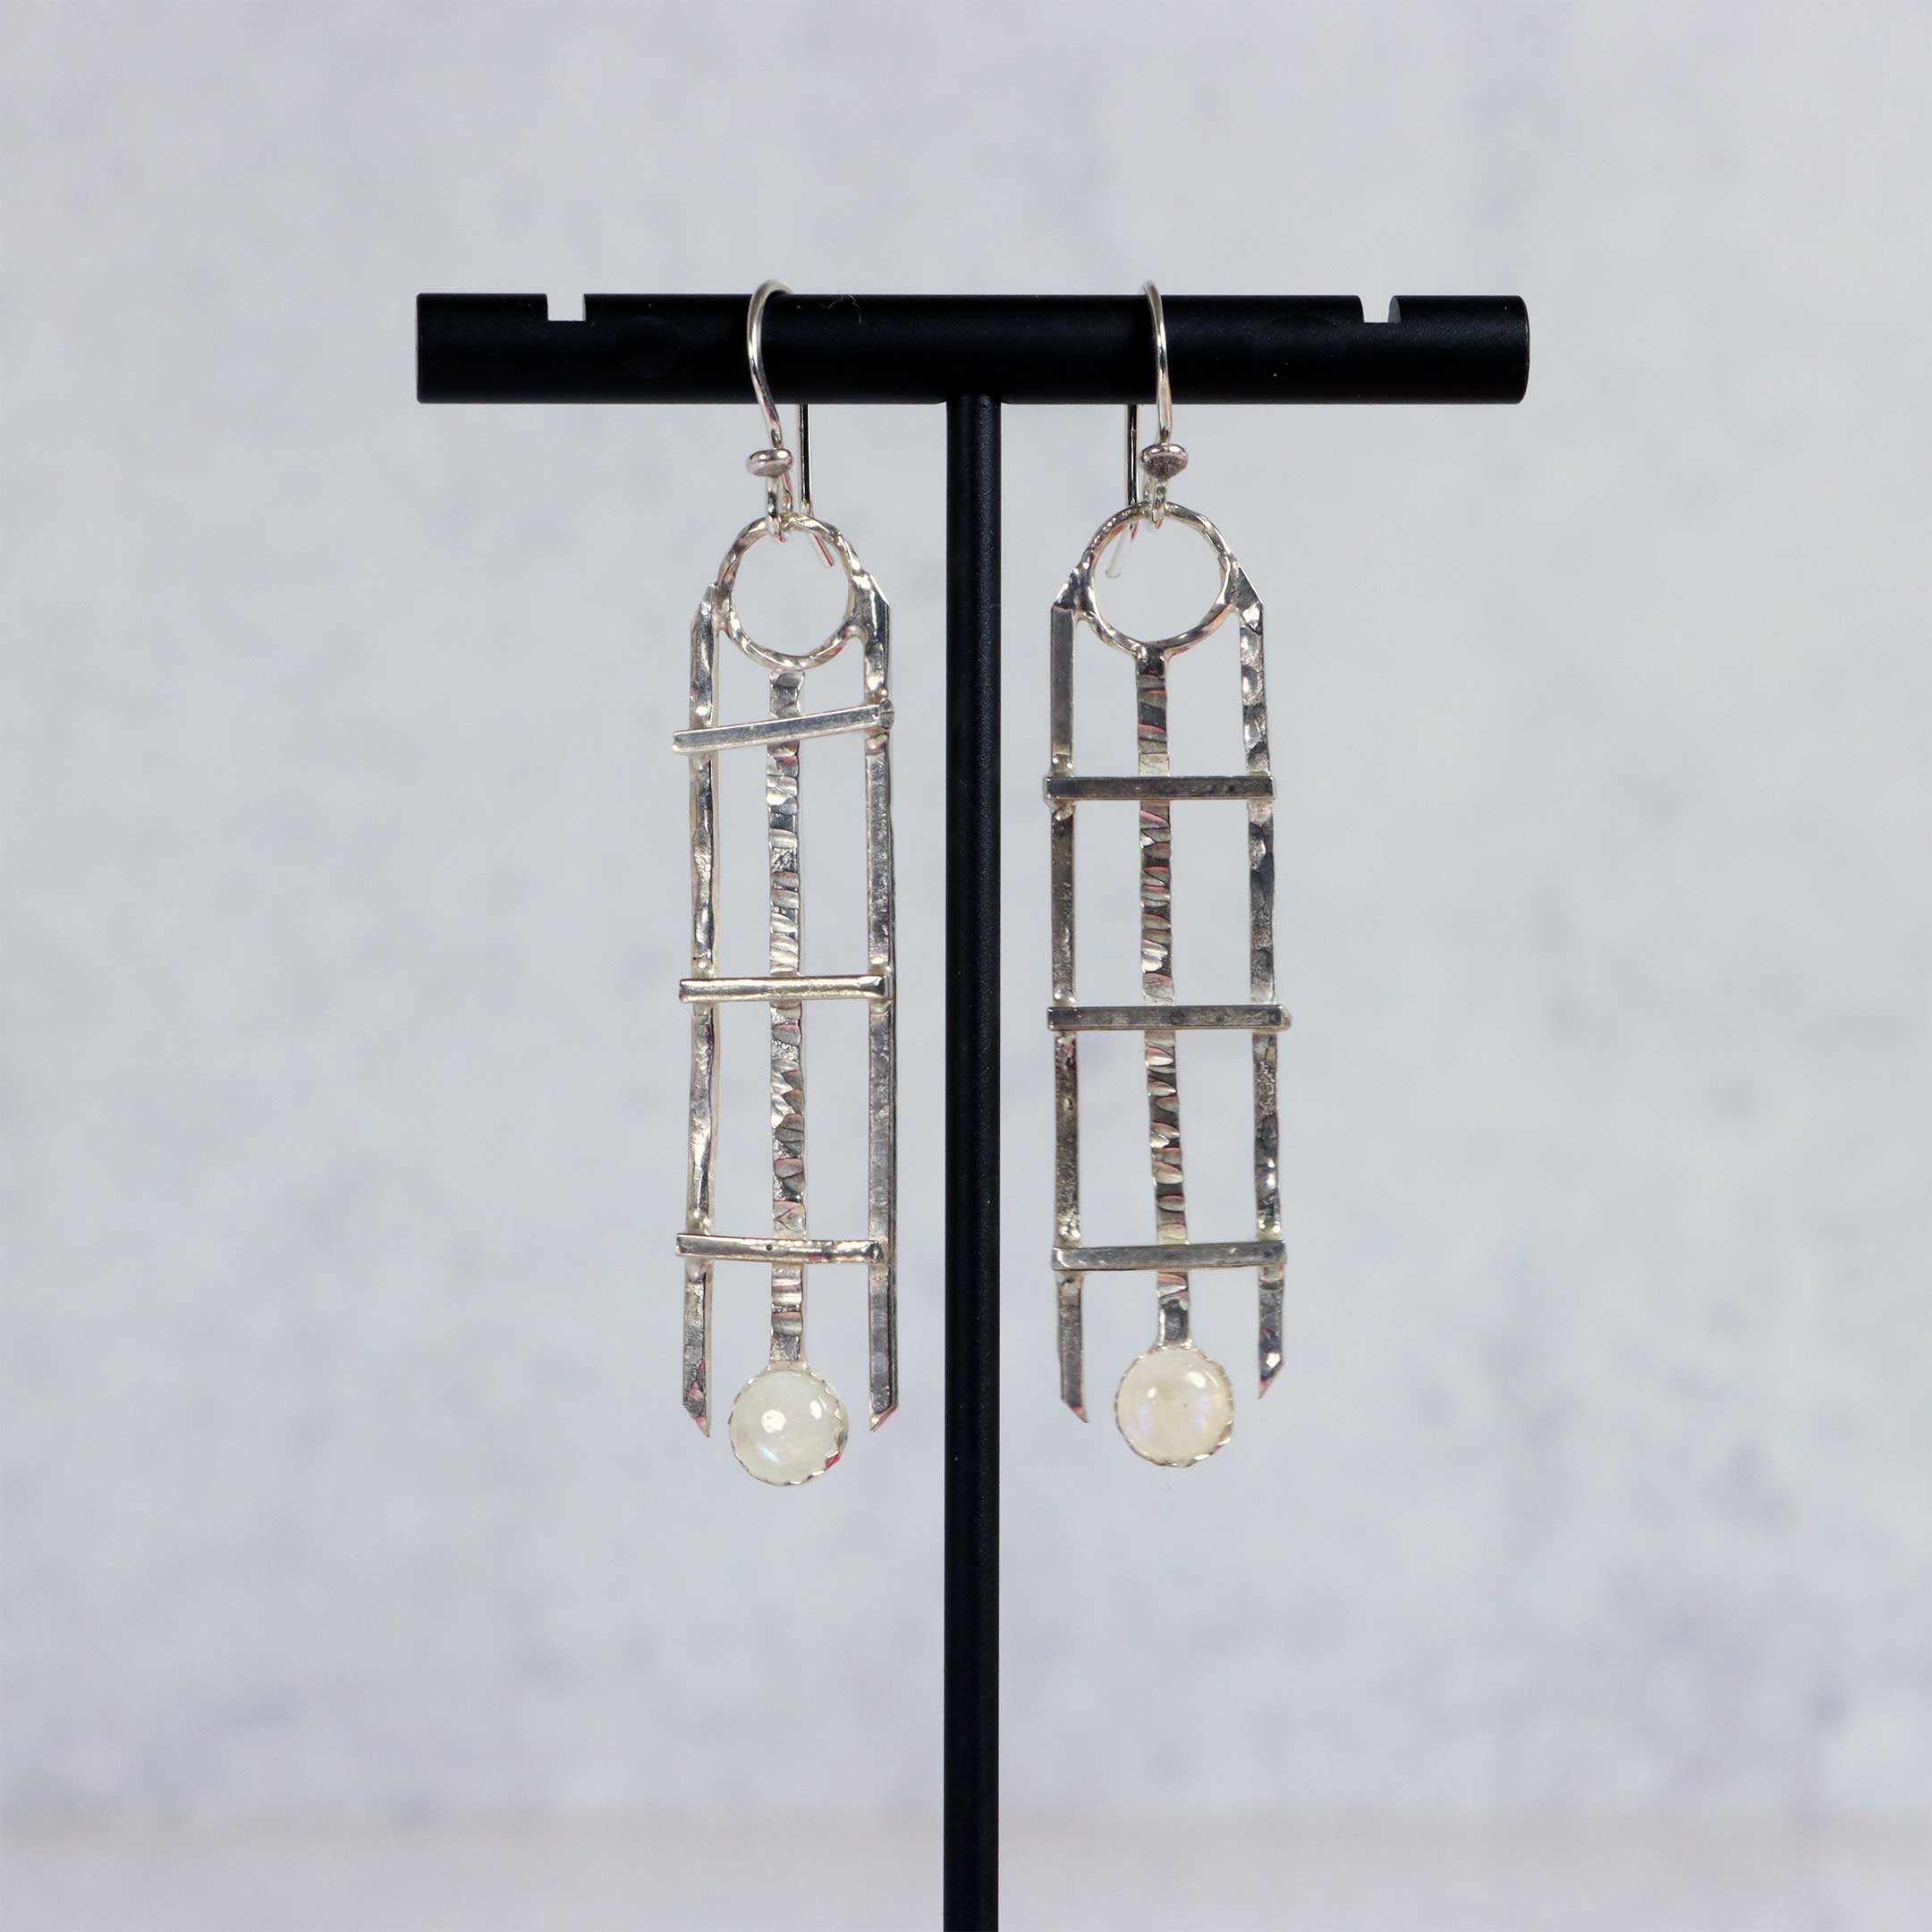 Sterling silver frame with moonstone earrings